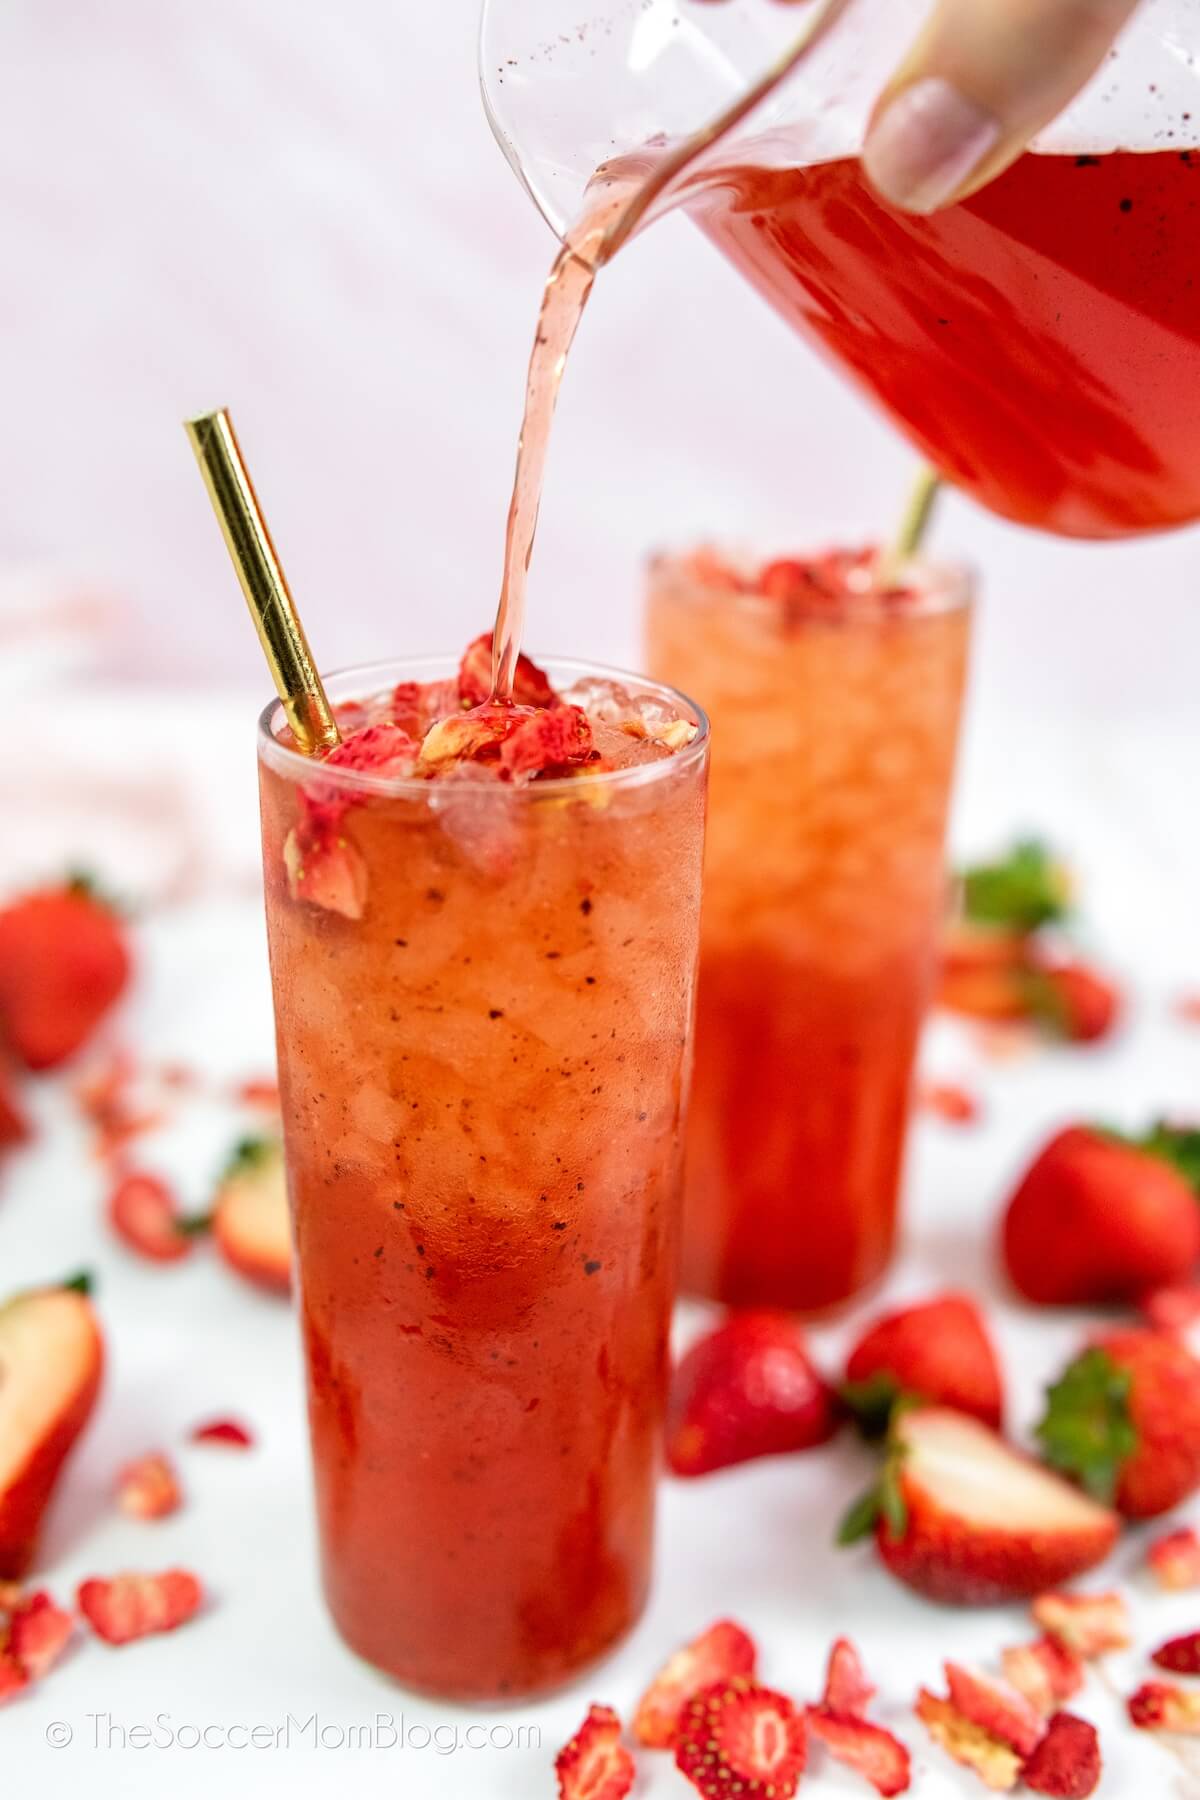 pouring strawberry drink into glass